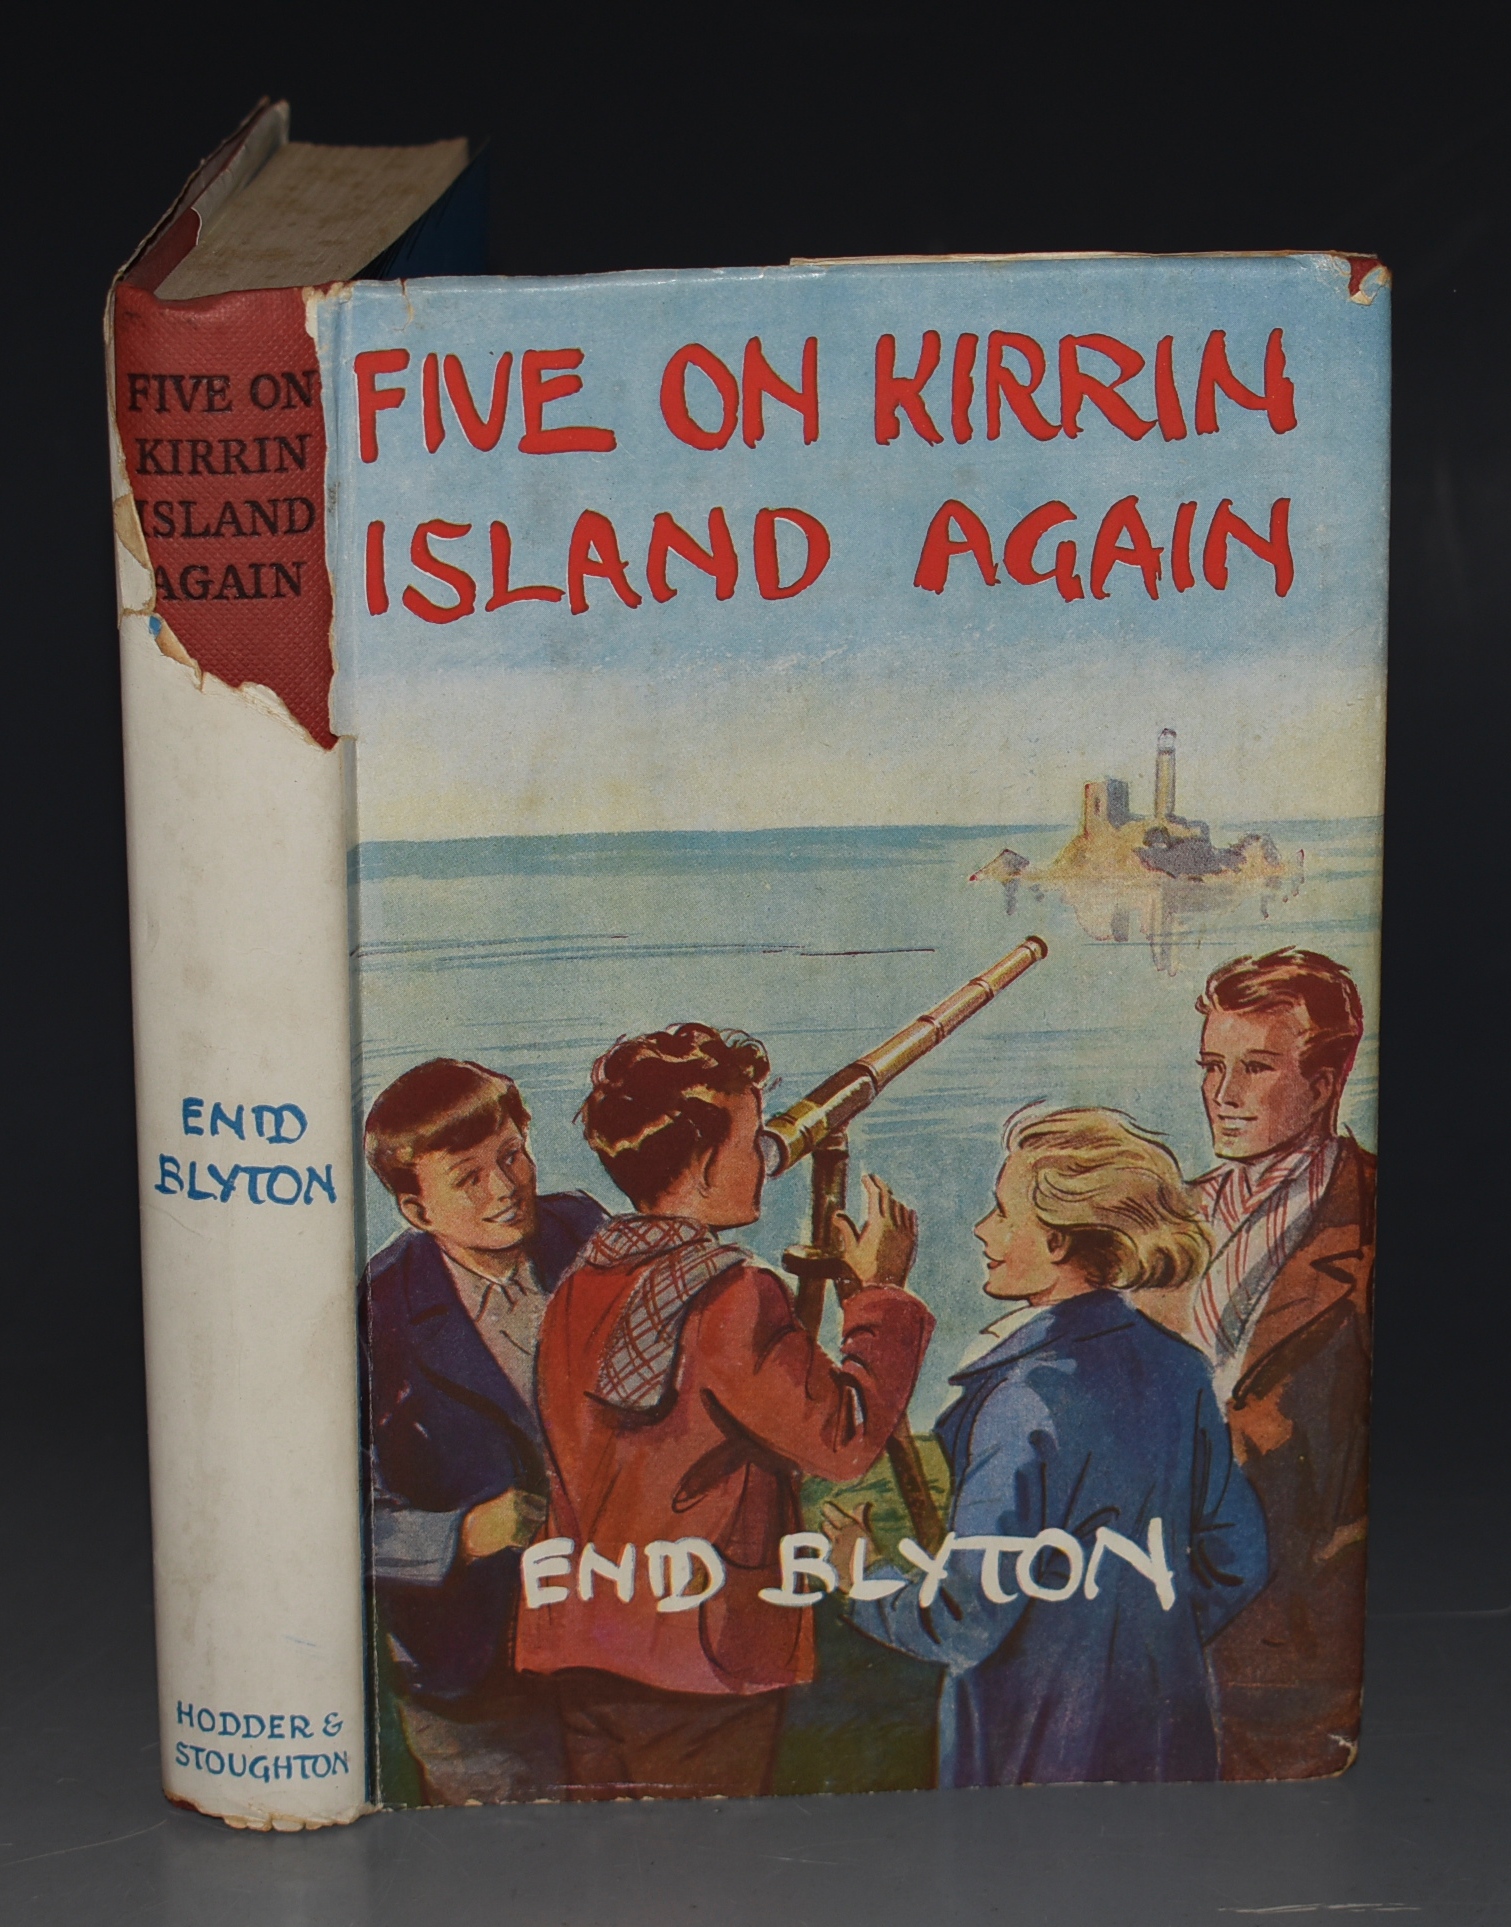 Five on Kirrin Island Again. Pictured by Eileen A. Soper. SIGNED COPY.